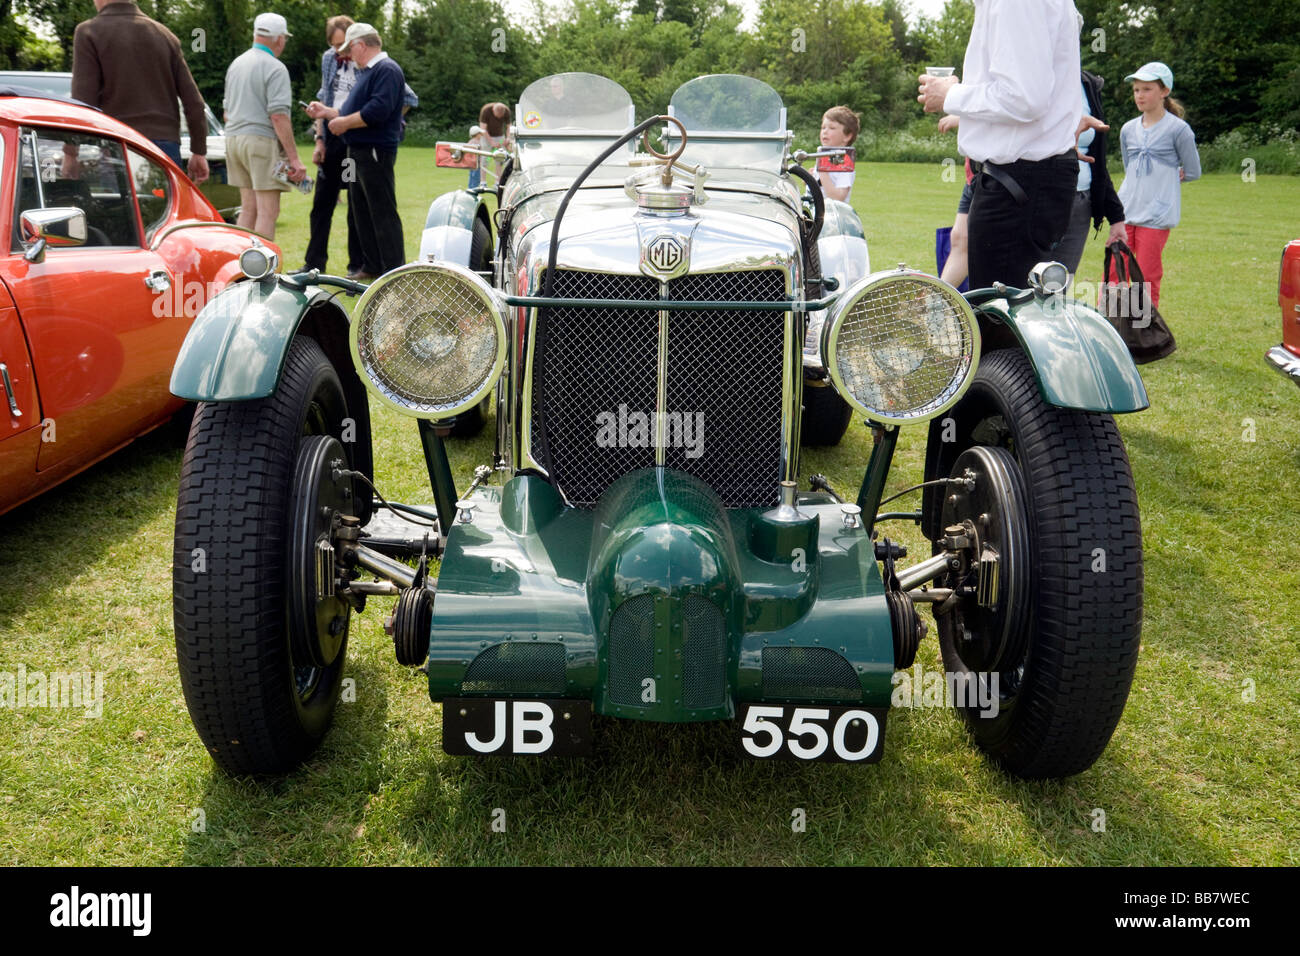 A Vintage MG sports car at a classic car rally, Wallingford, Oxfordshire, UK Stock Photo